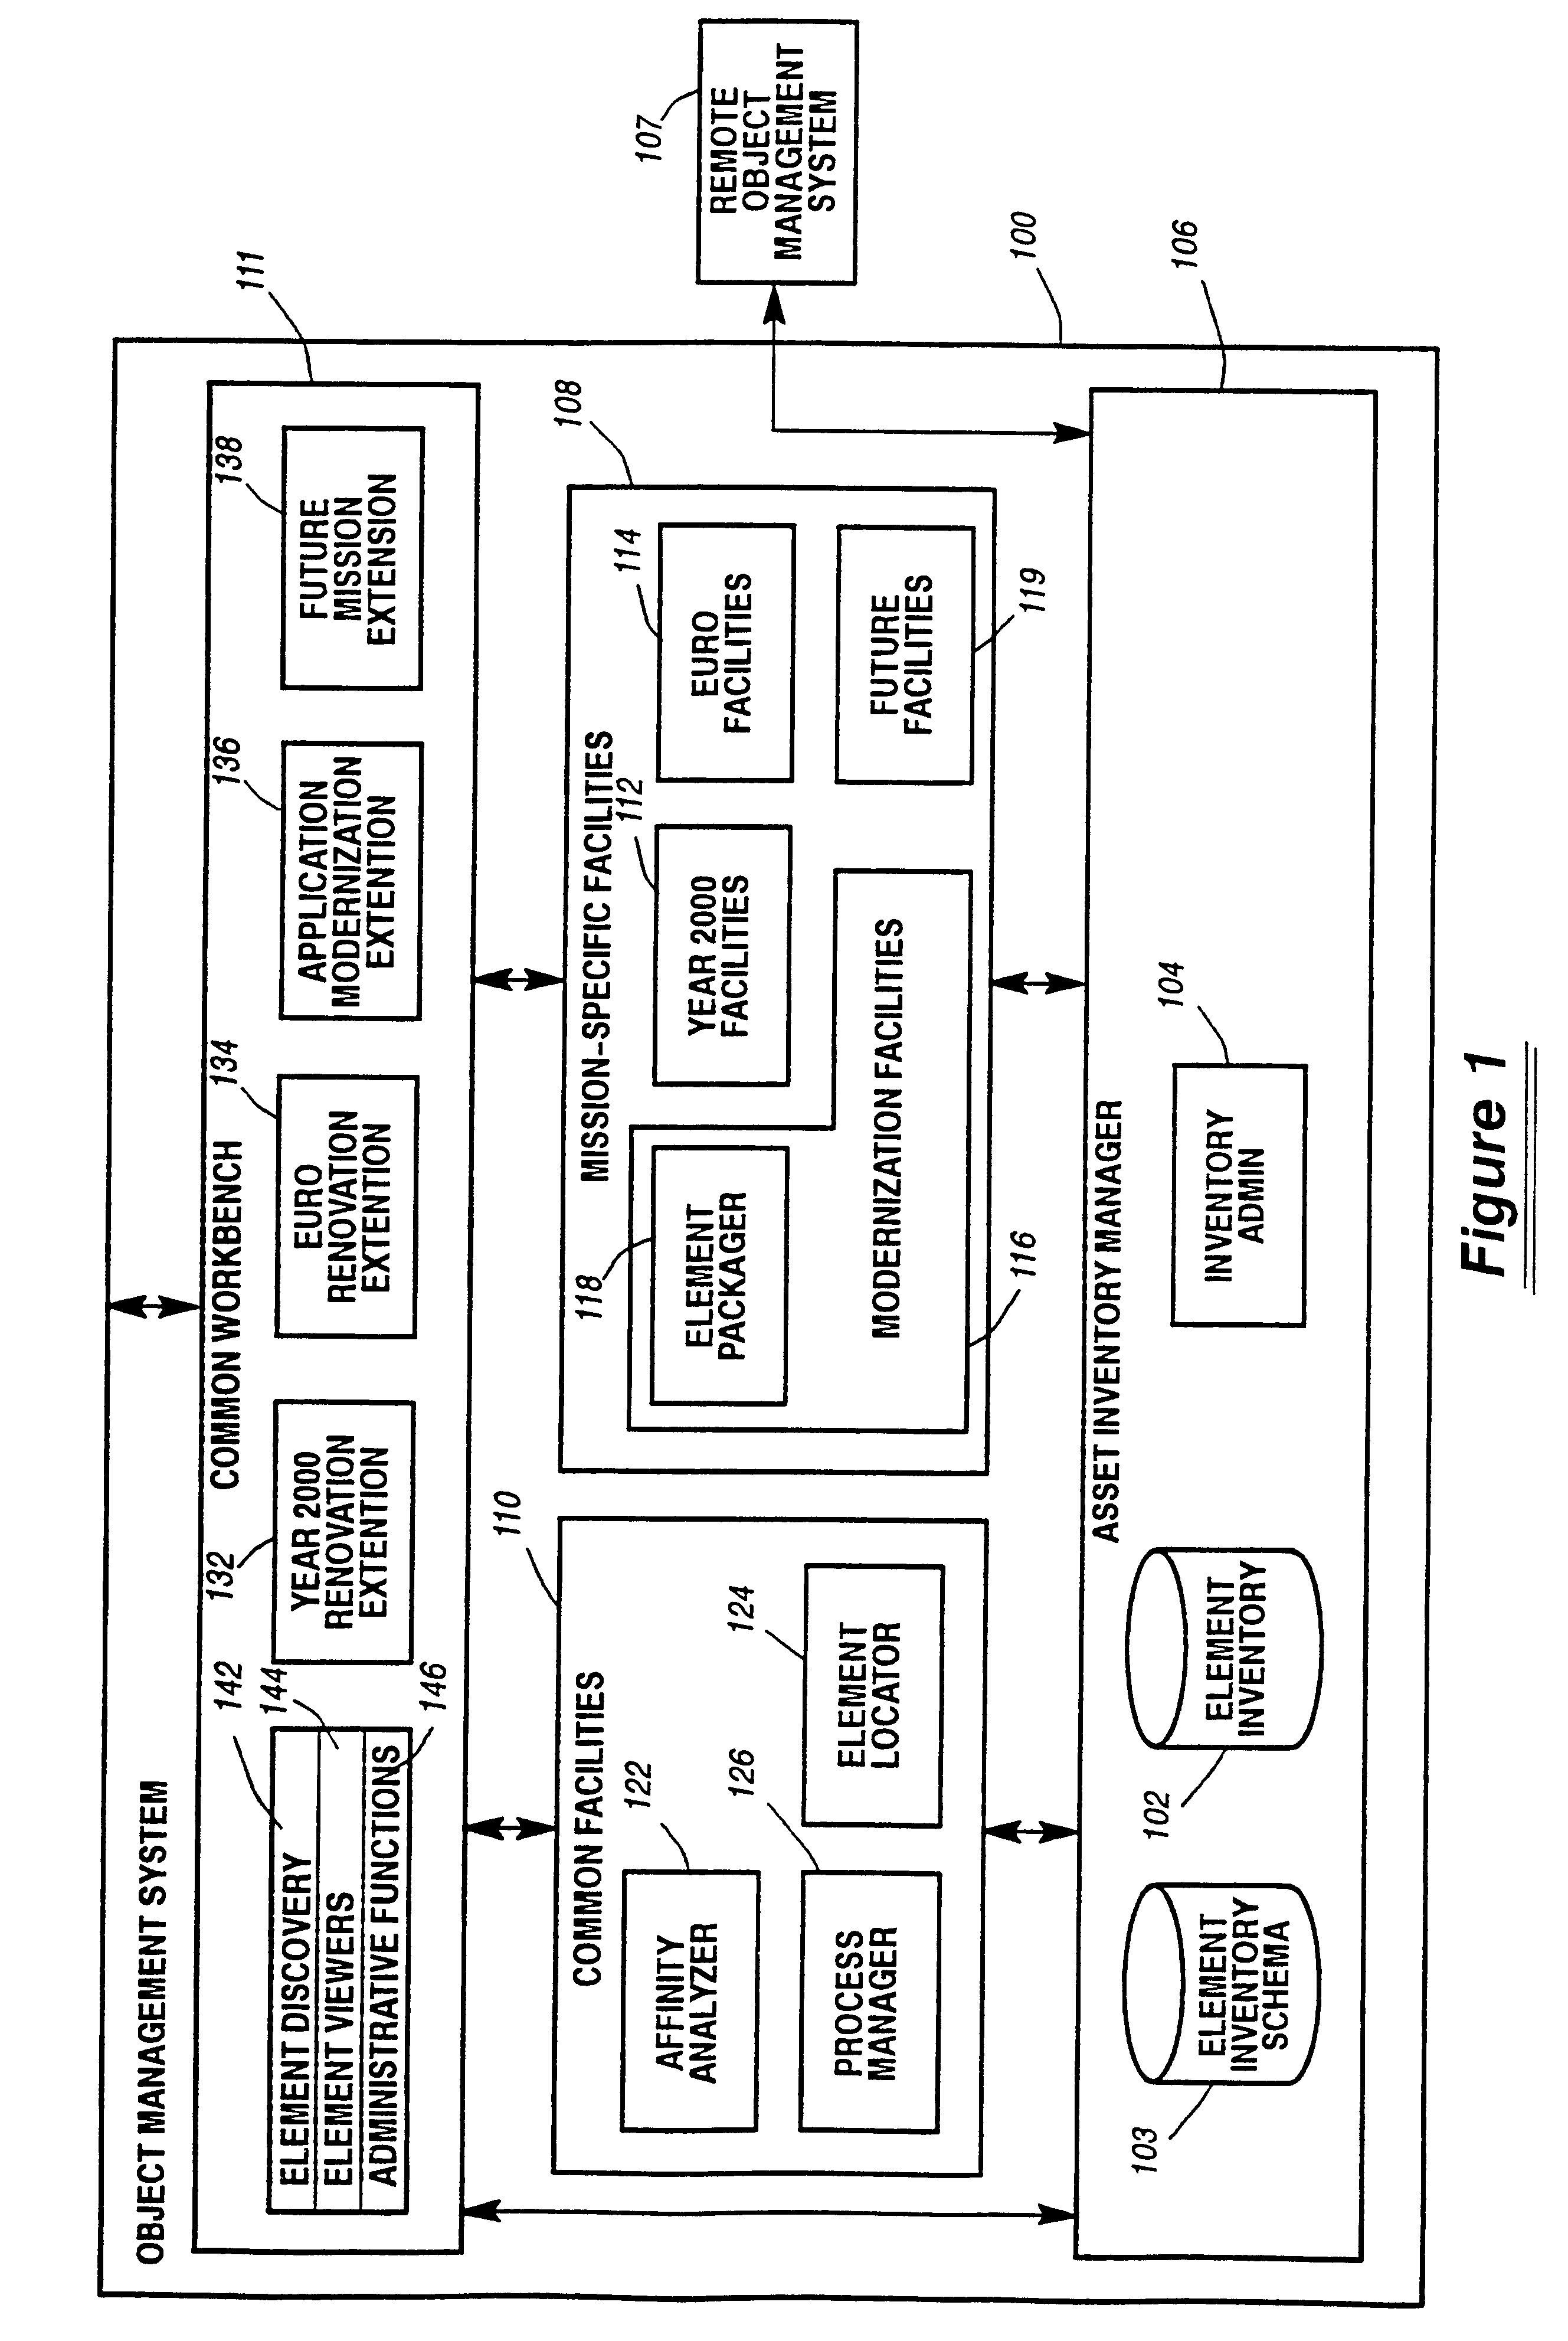 System and method for defining and managing reusable groups software constructs within an object management system